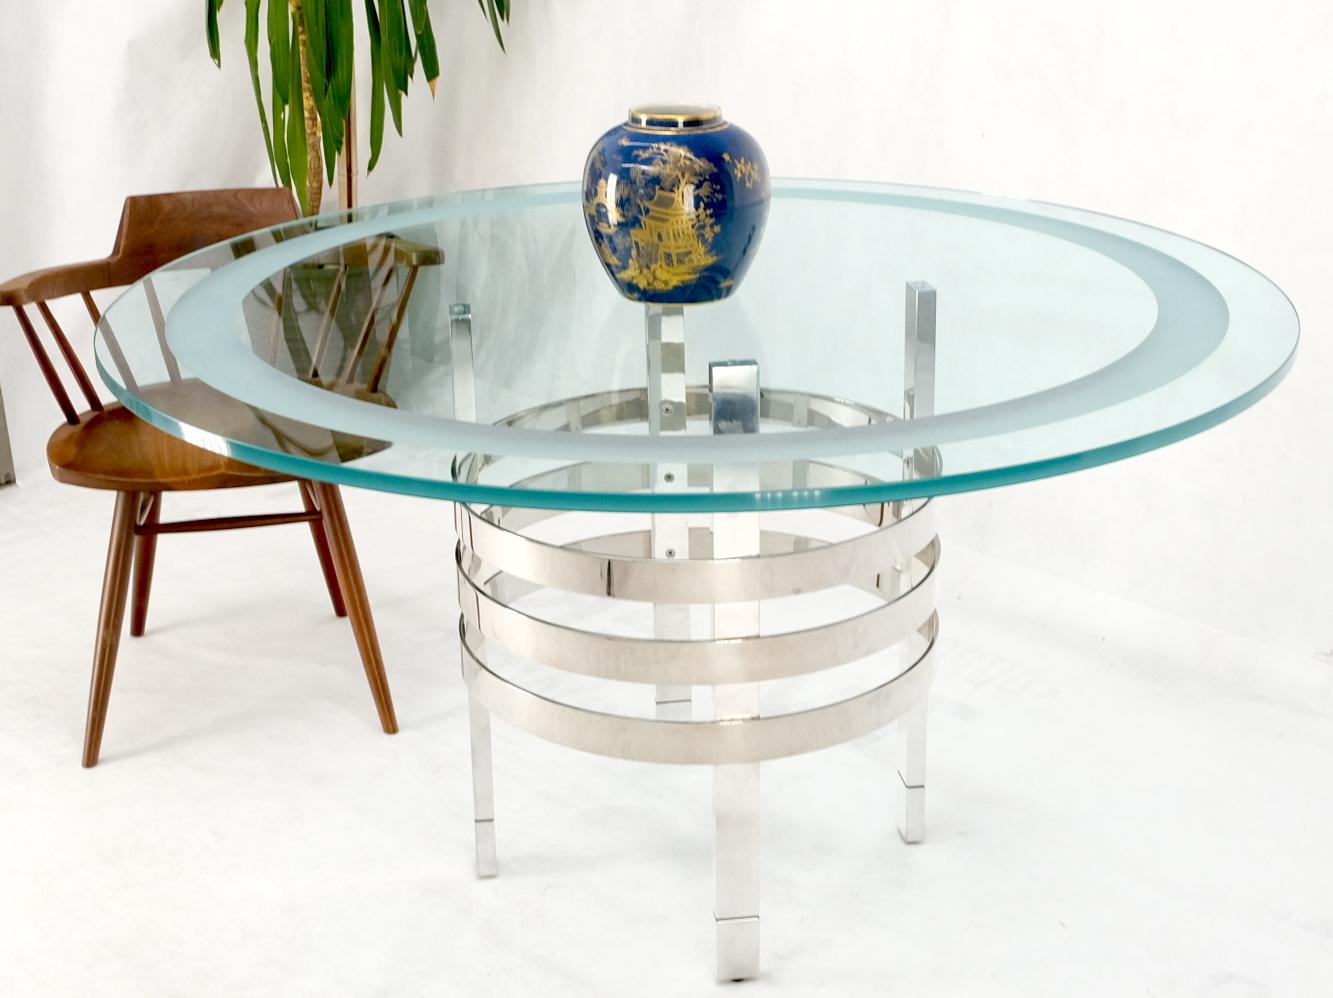 Heavy Polished Solid Stainless Steel Glass Round Dining Game Table Ribbed Design In Good Condition For Sale In Rockaway, NJ